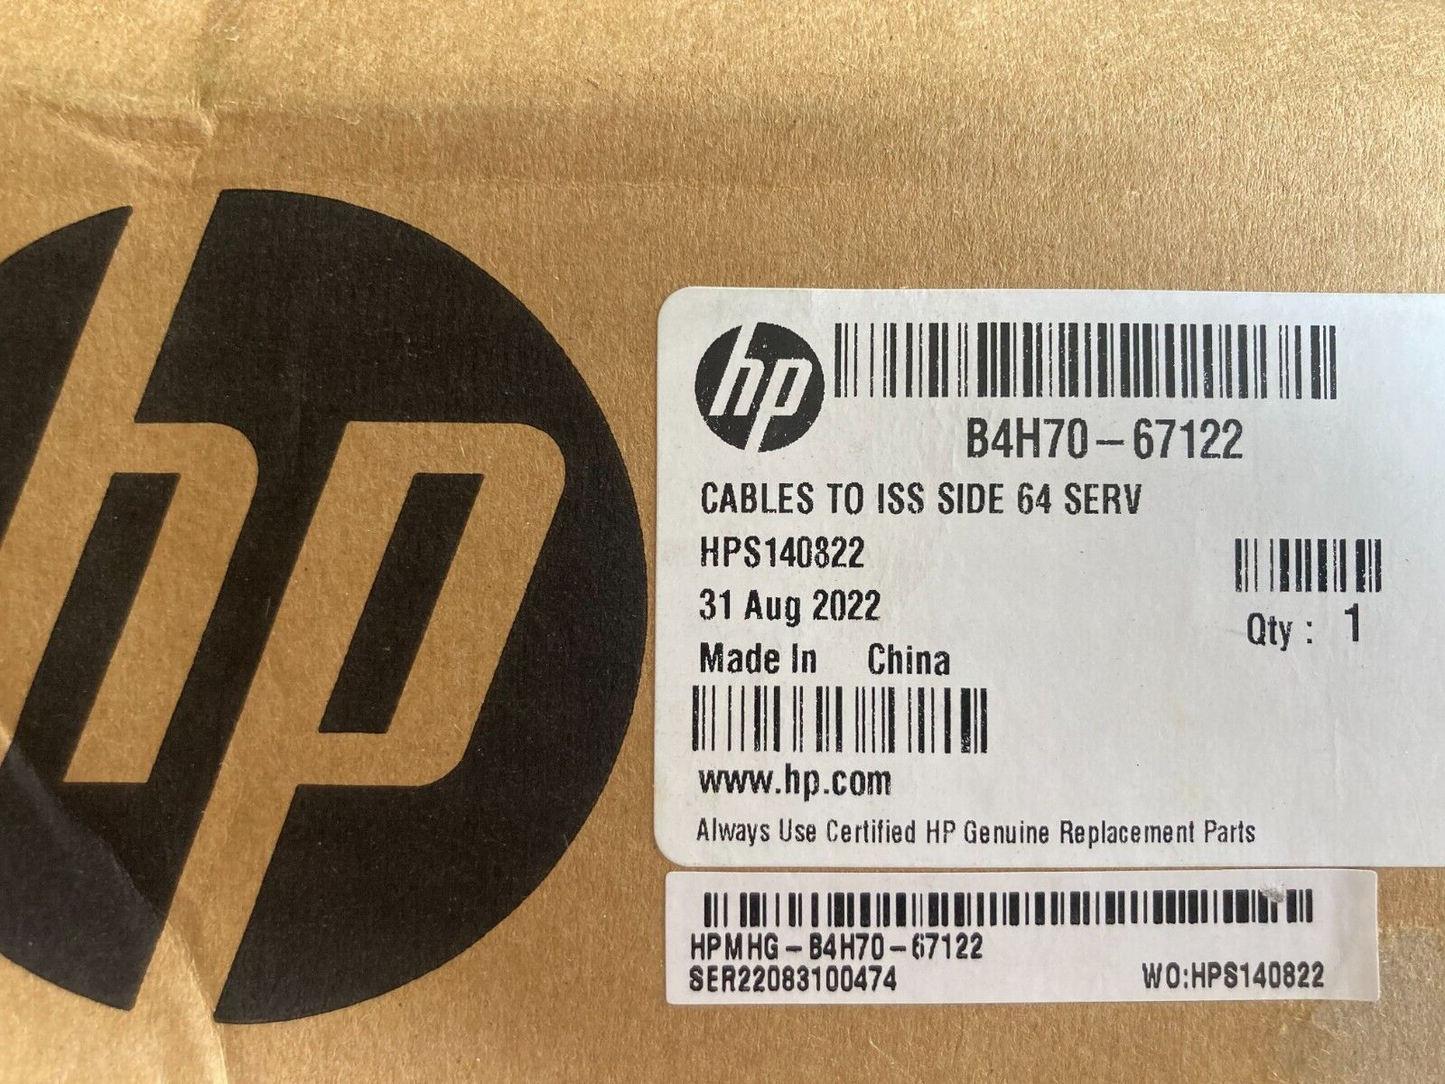 NEW HP B4H70-67122 CABLES TO ISS SIDE "64 LATEX 330 360